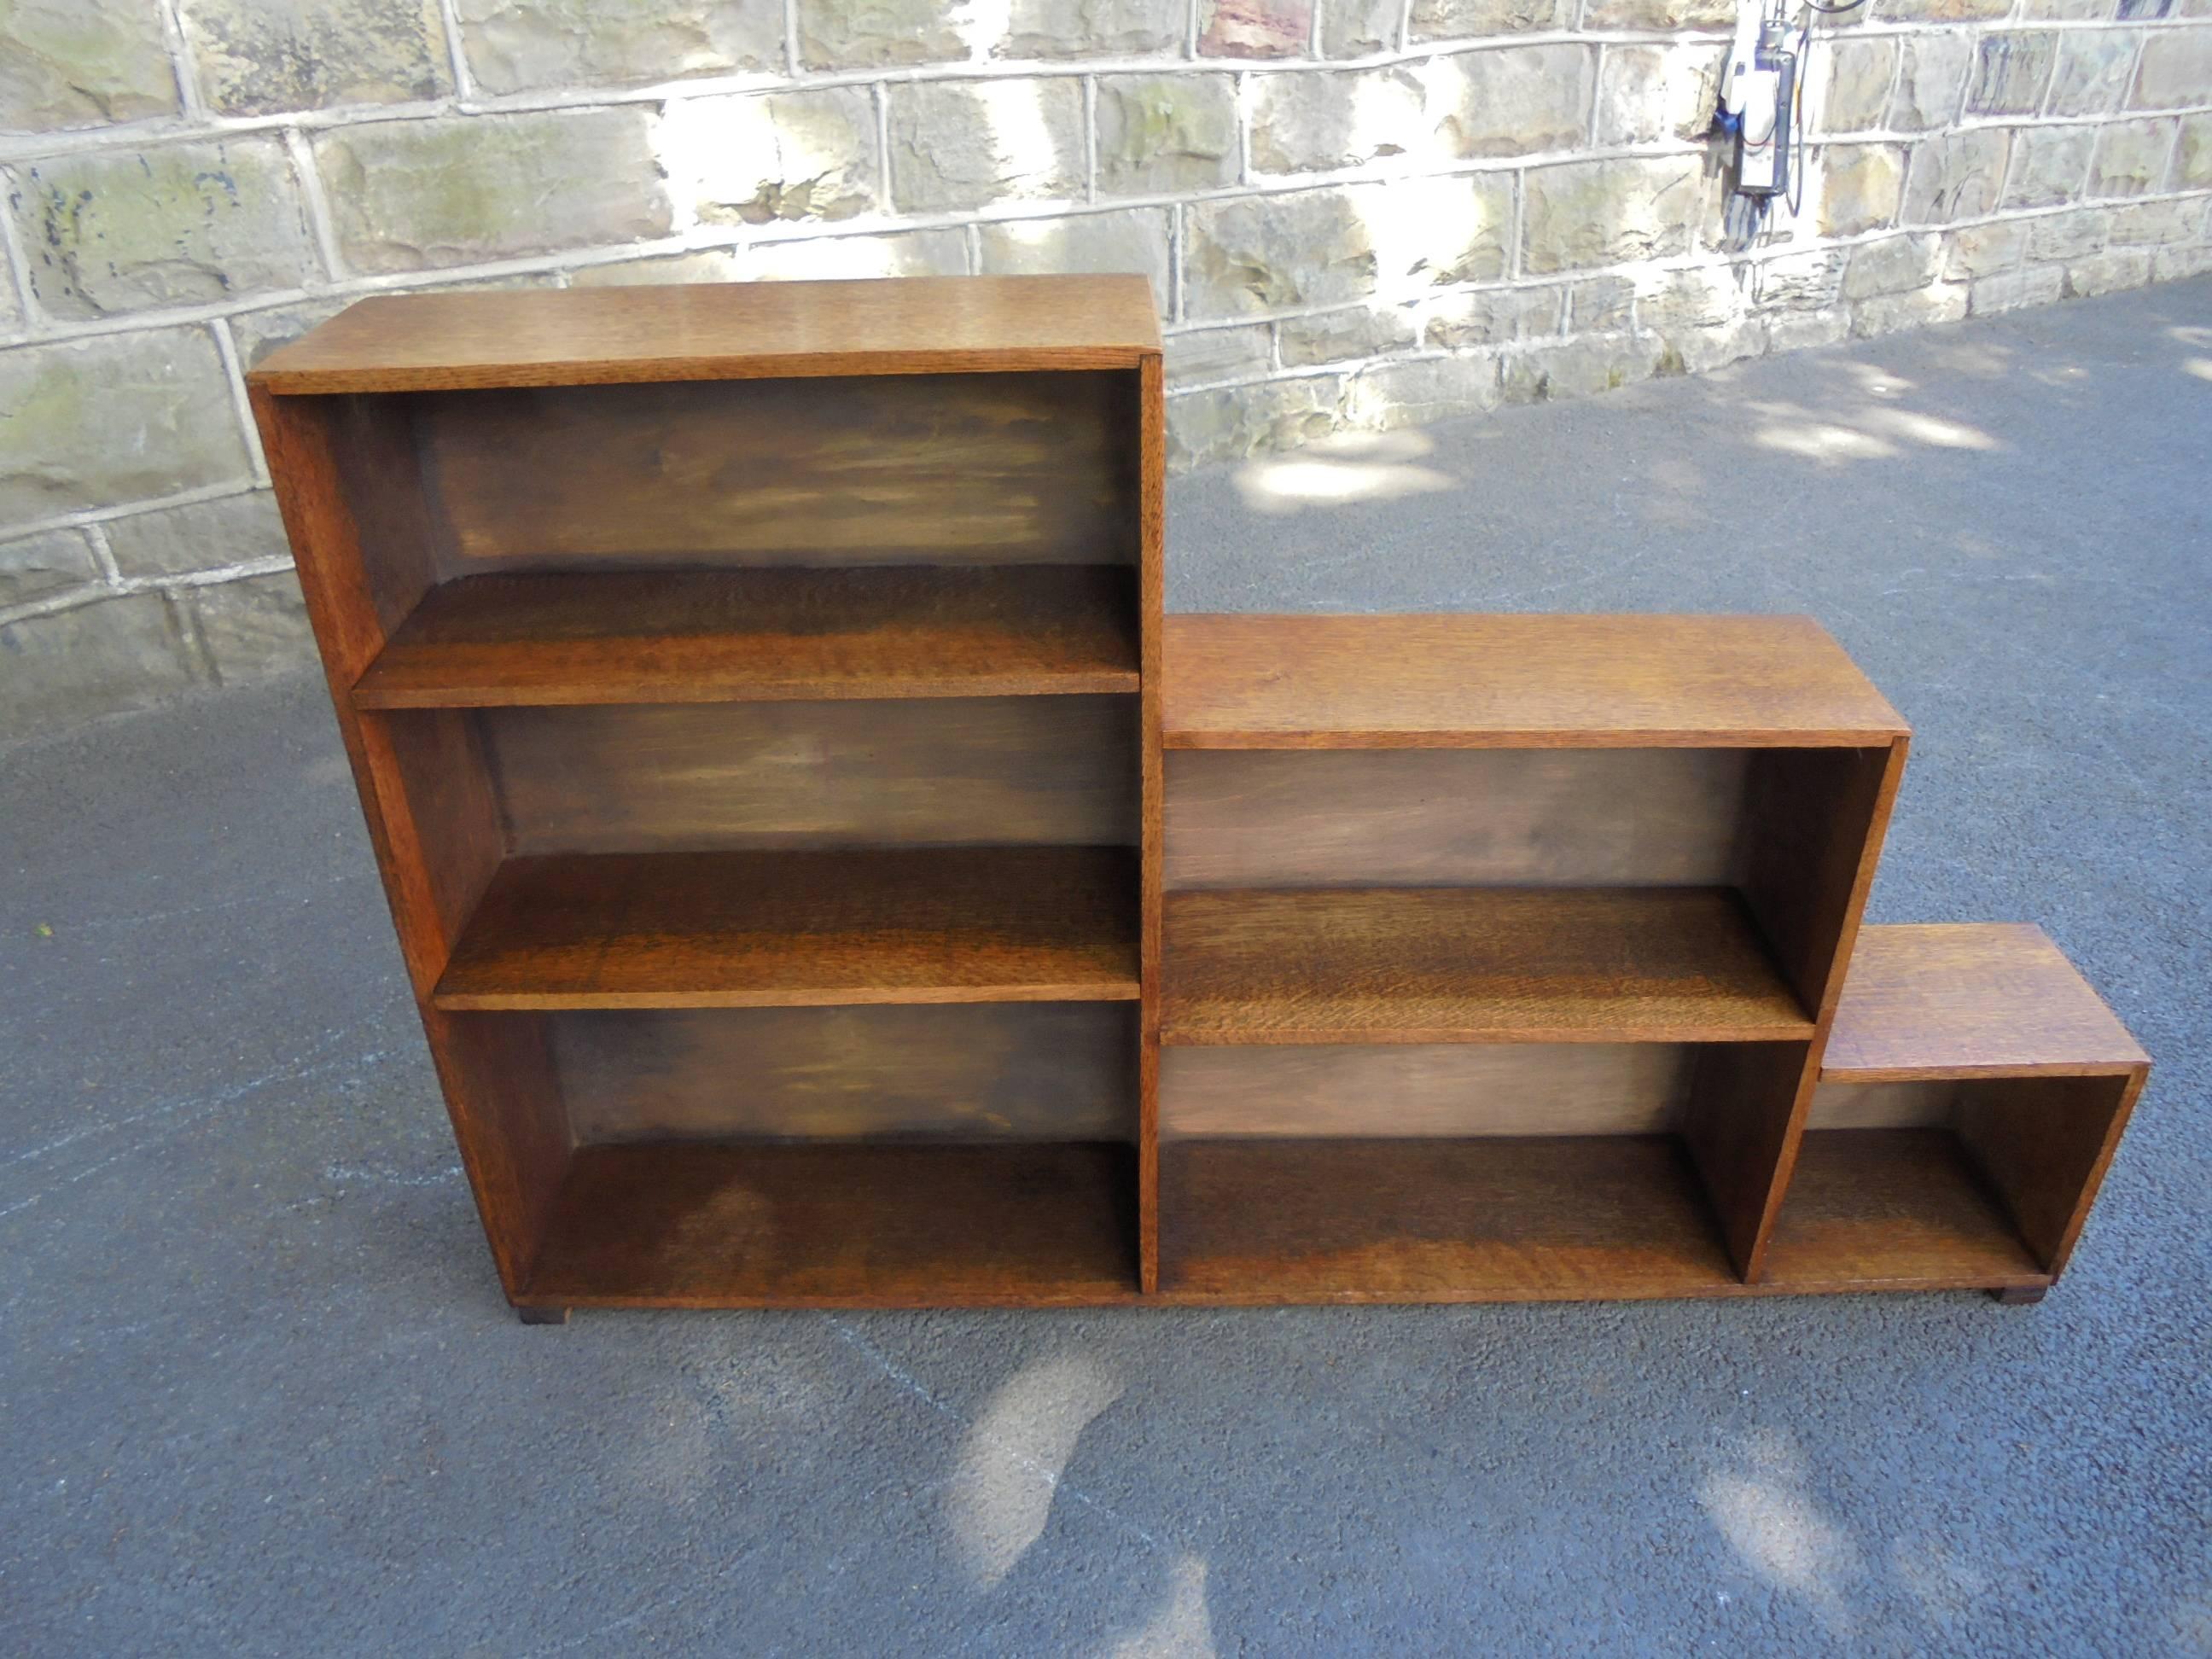 Offered for sale is this antique stepped oak bookcase.

In the manner of Heals. Solid oak which is a light colour, stepped bookcase with open fixed height shelving for bookcase. Standing on square block feet.

Offered in good clean original